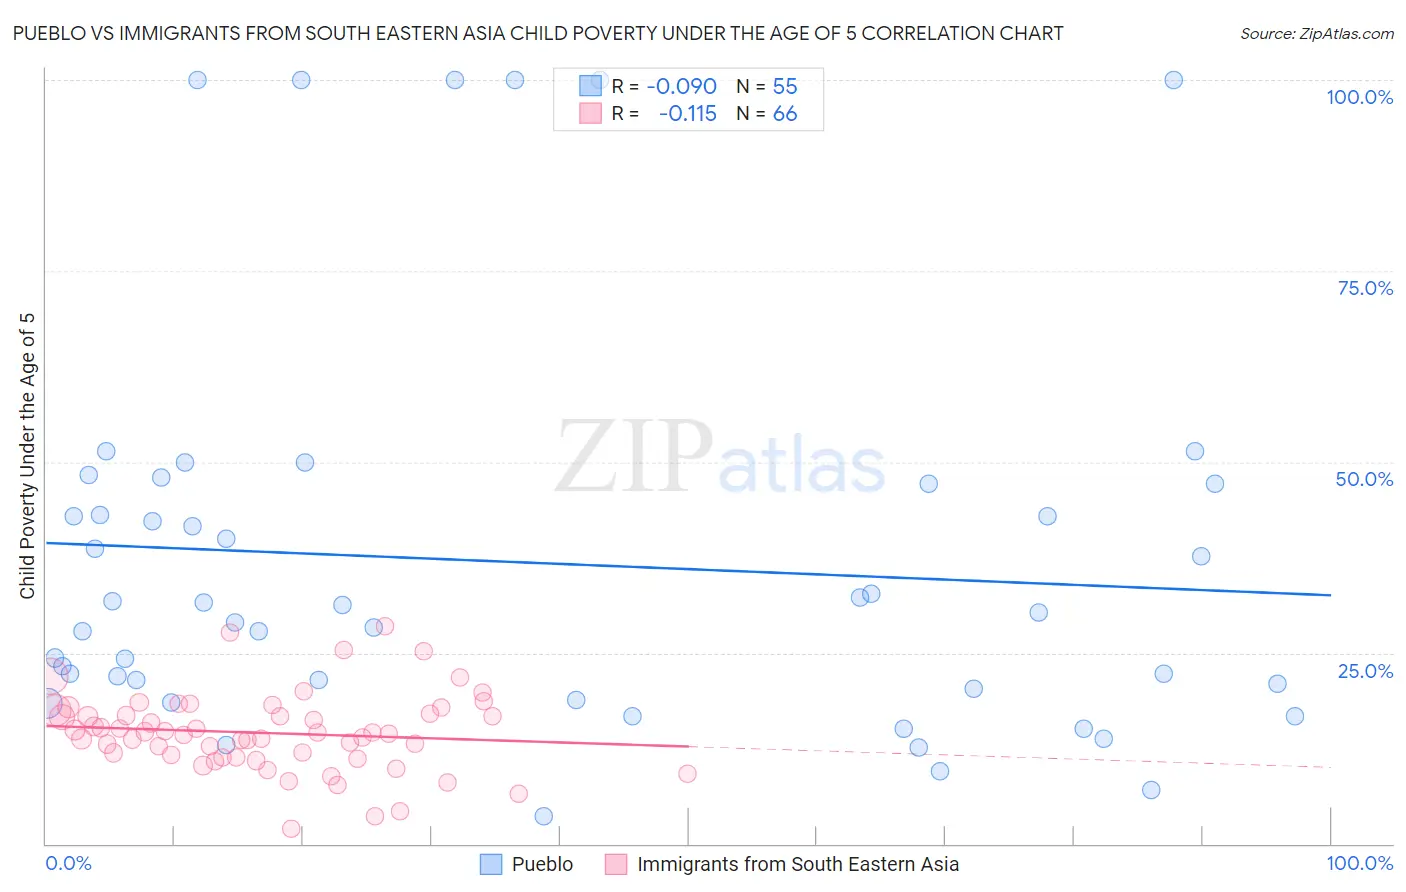 Pueblo vs Immigrants from South Eastern Asia Child Poverty Under the Age of 5